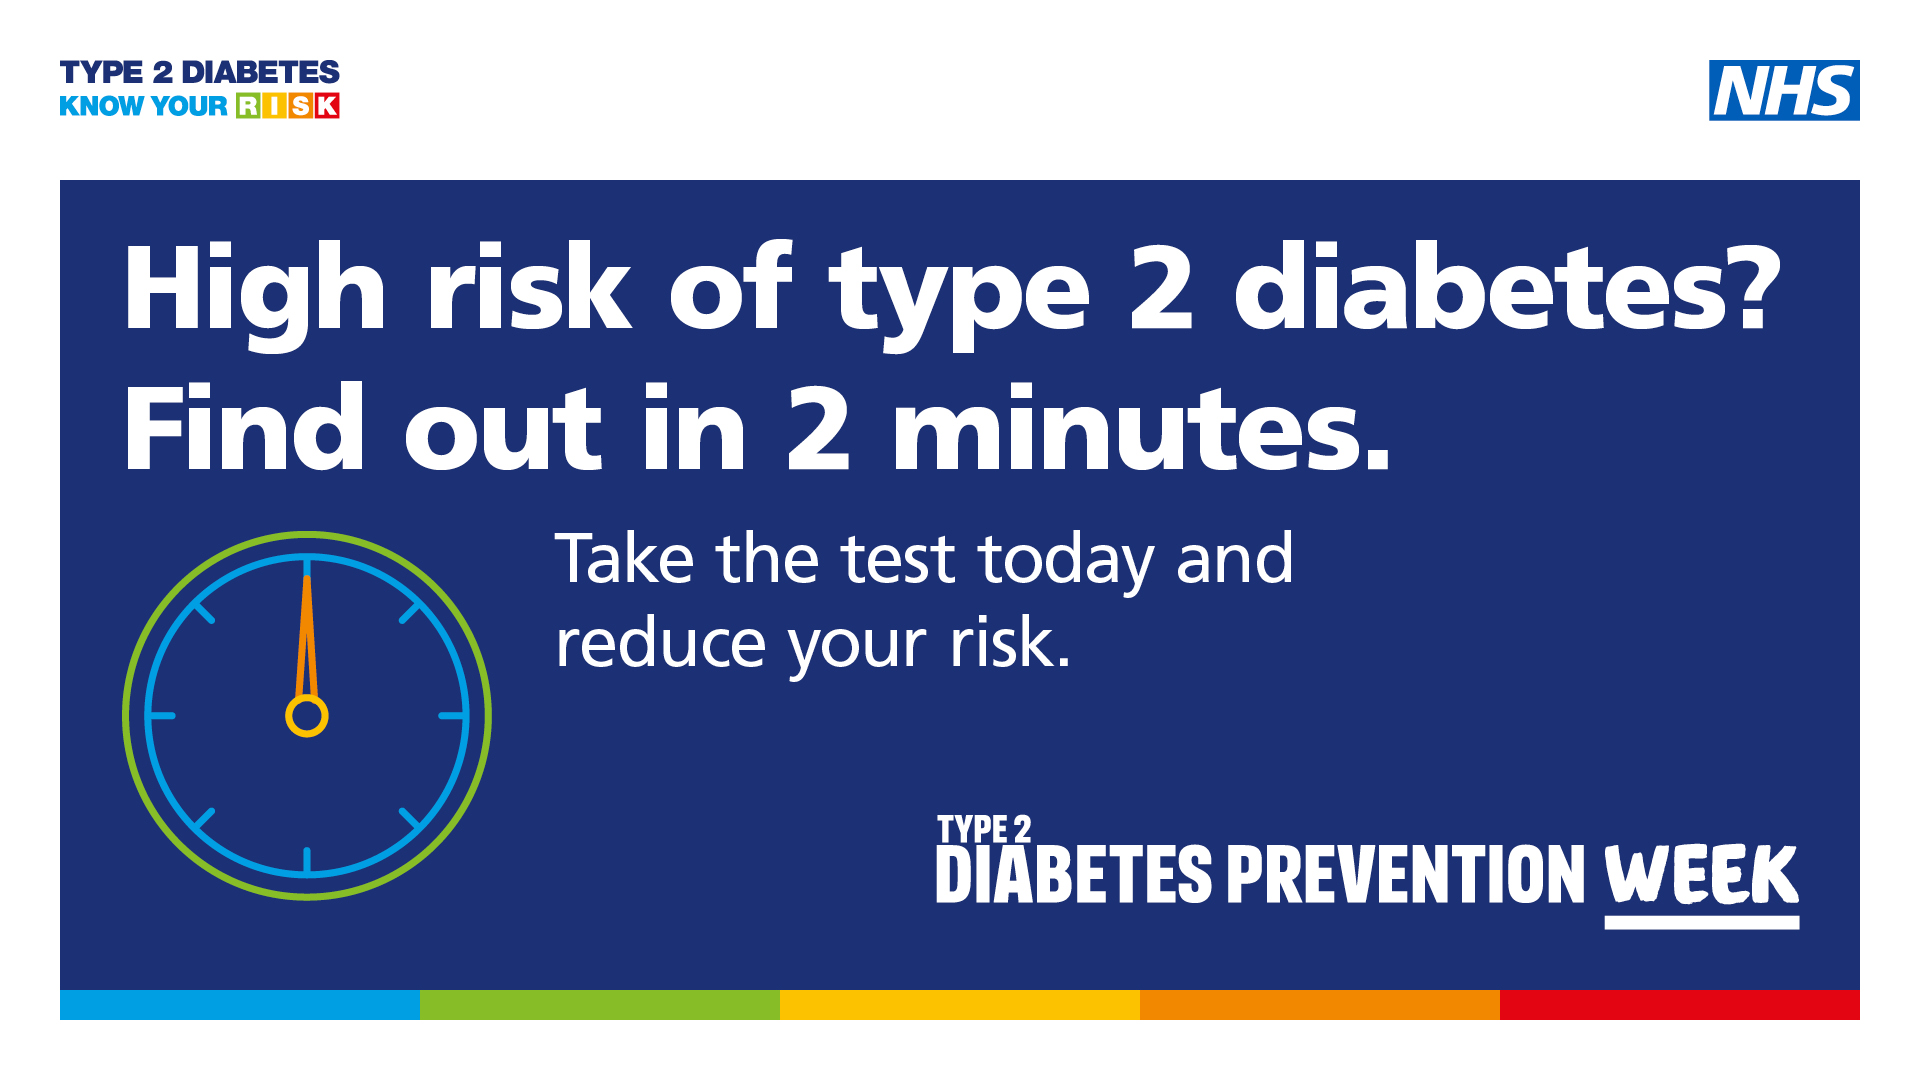 High risk of type 2 diabetes? Find out in two minutes. Take the test today and reduce your risk. The Type 2 diabetes logo is in the top left corner. The NHS logo is in the top right corner. Type 2 diabetes prevention week logo is in the lower third of the graphic.